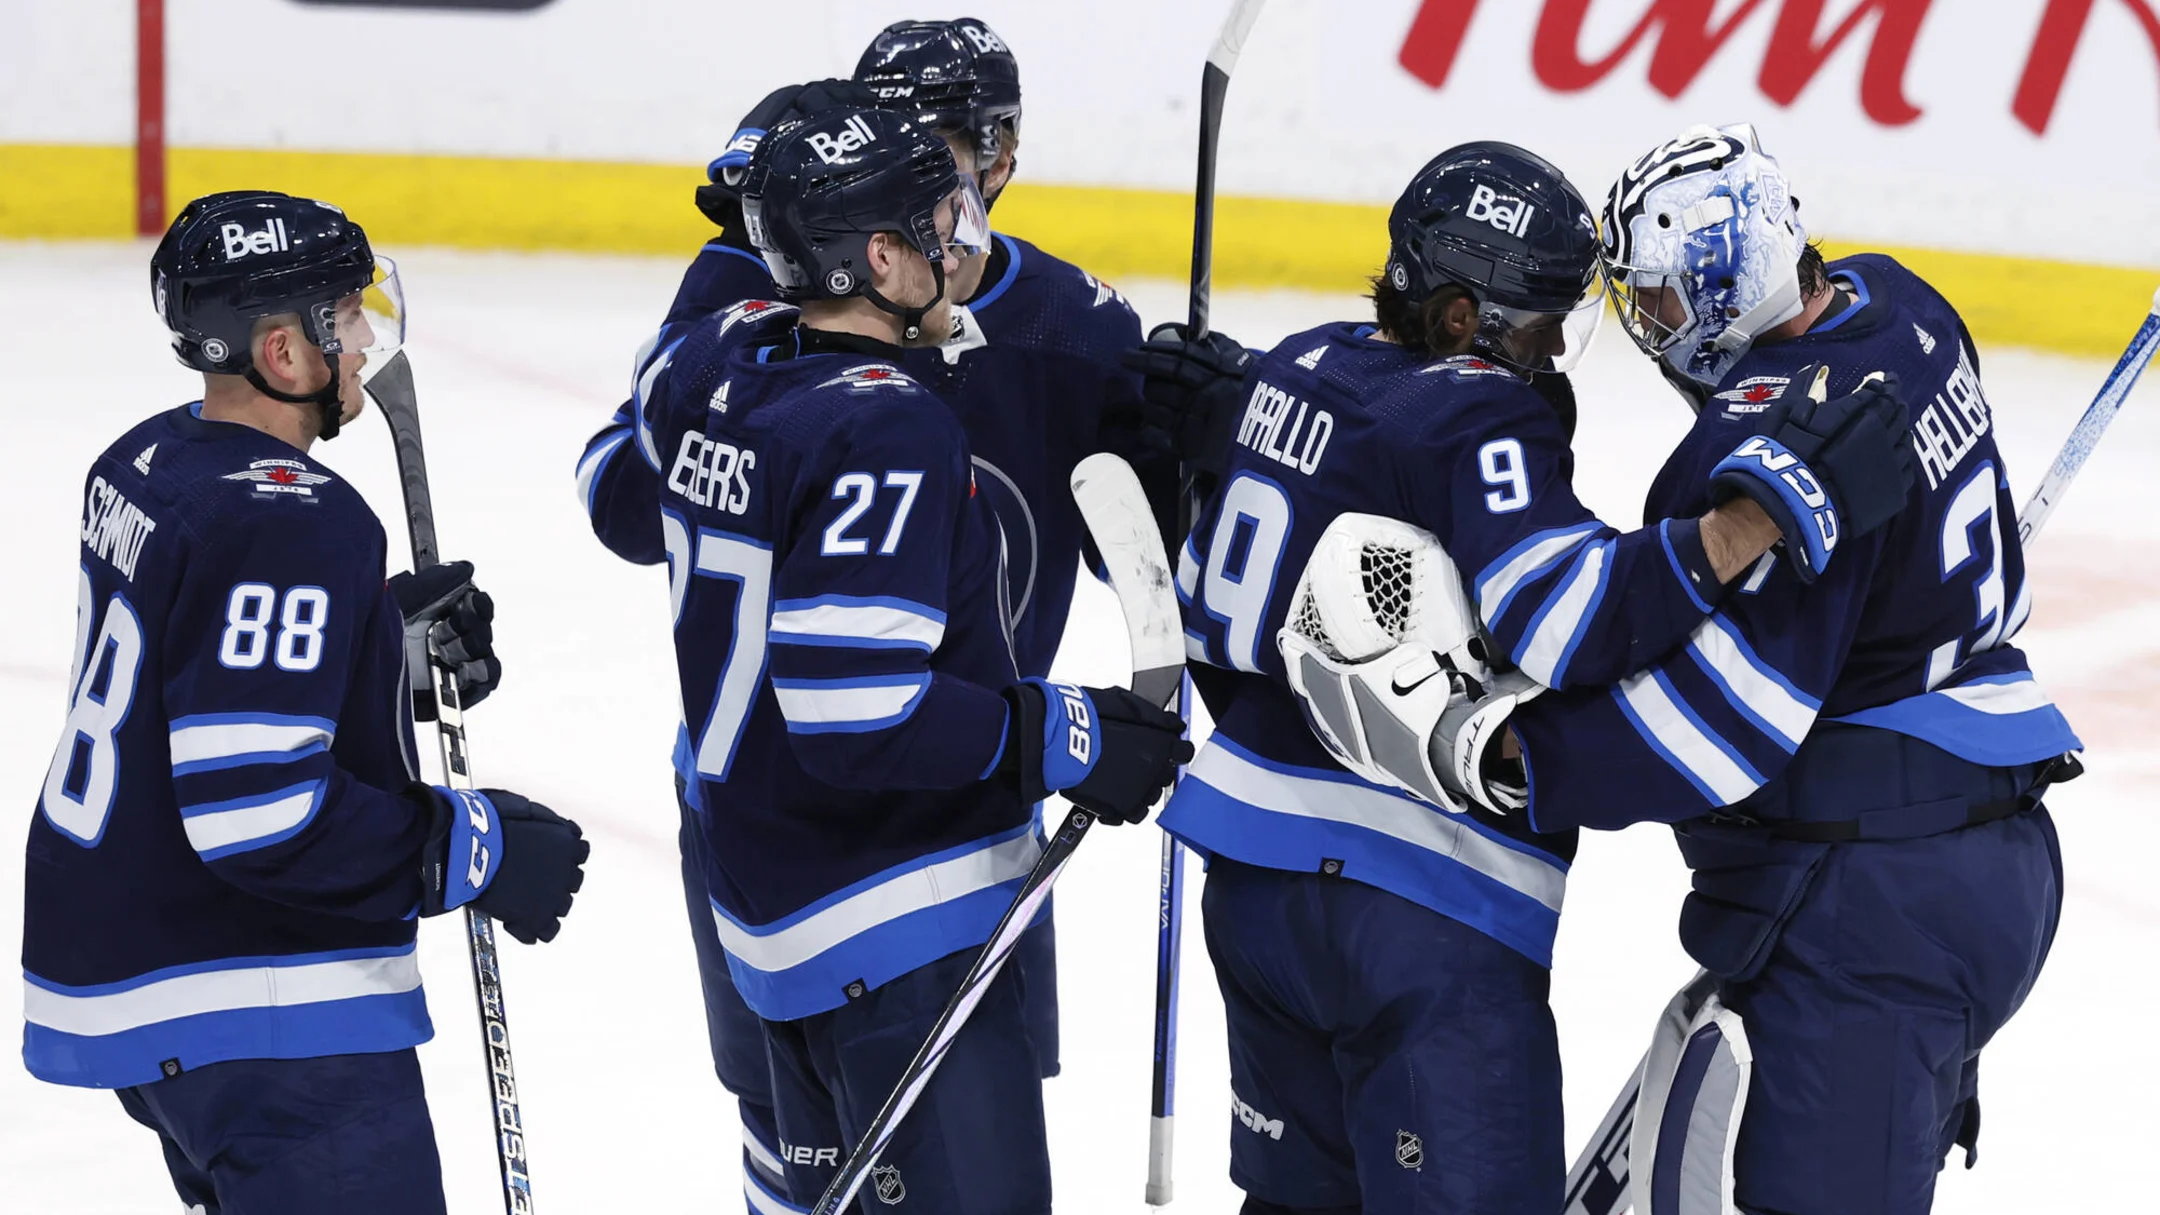 “No need for panic”: Winnipeg Jets pursue playoff success with a formidable lineup considering the…